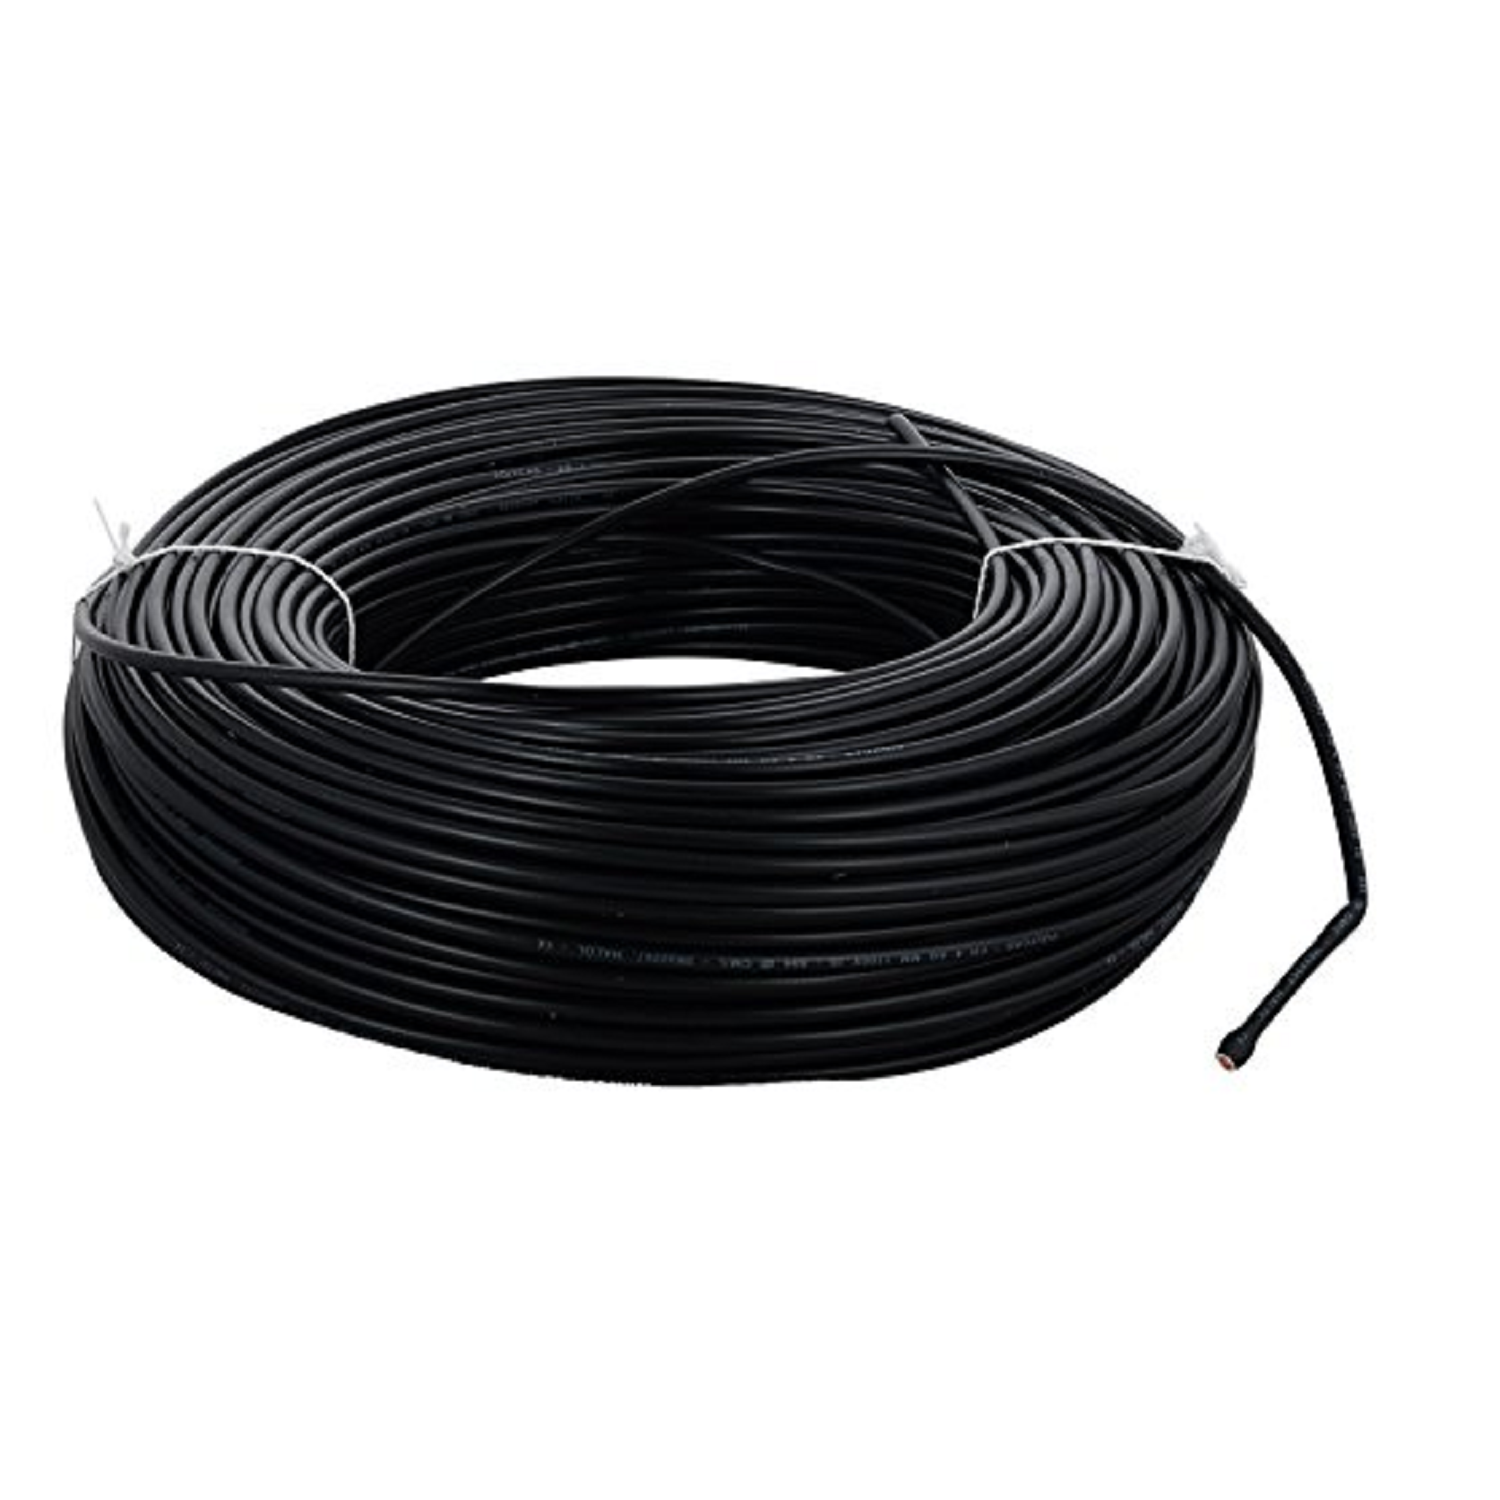 Polycab FR-LS 1 SQ-MM, (300 Meters) PVC Insulated Copper Wire Single Core (Black)